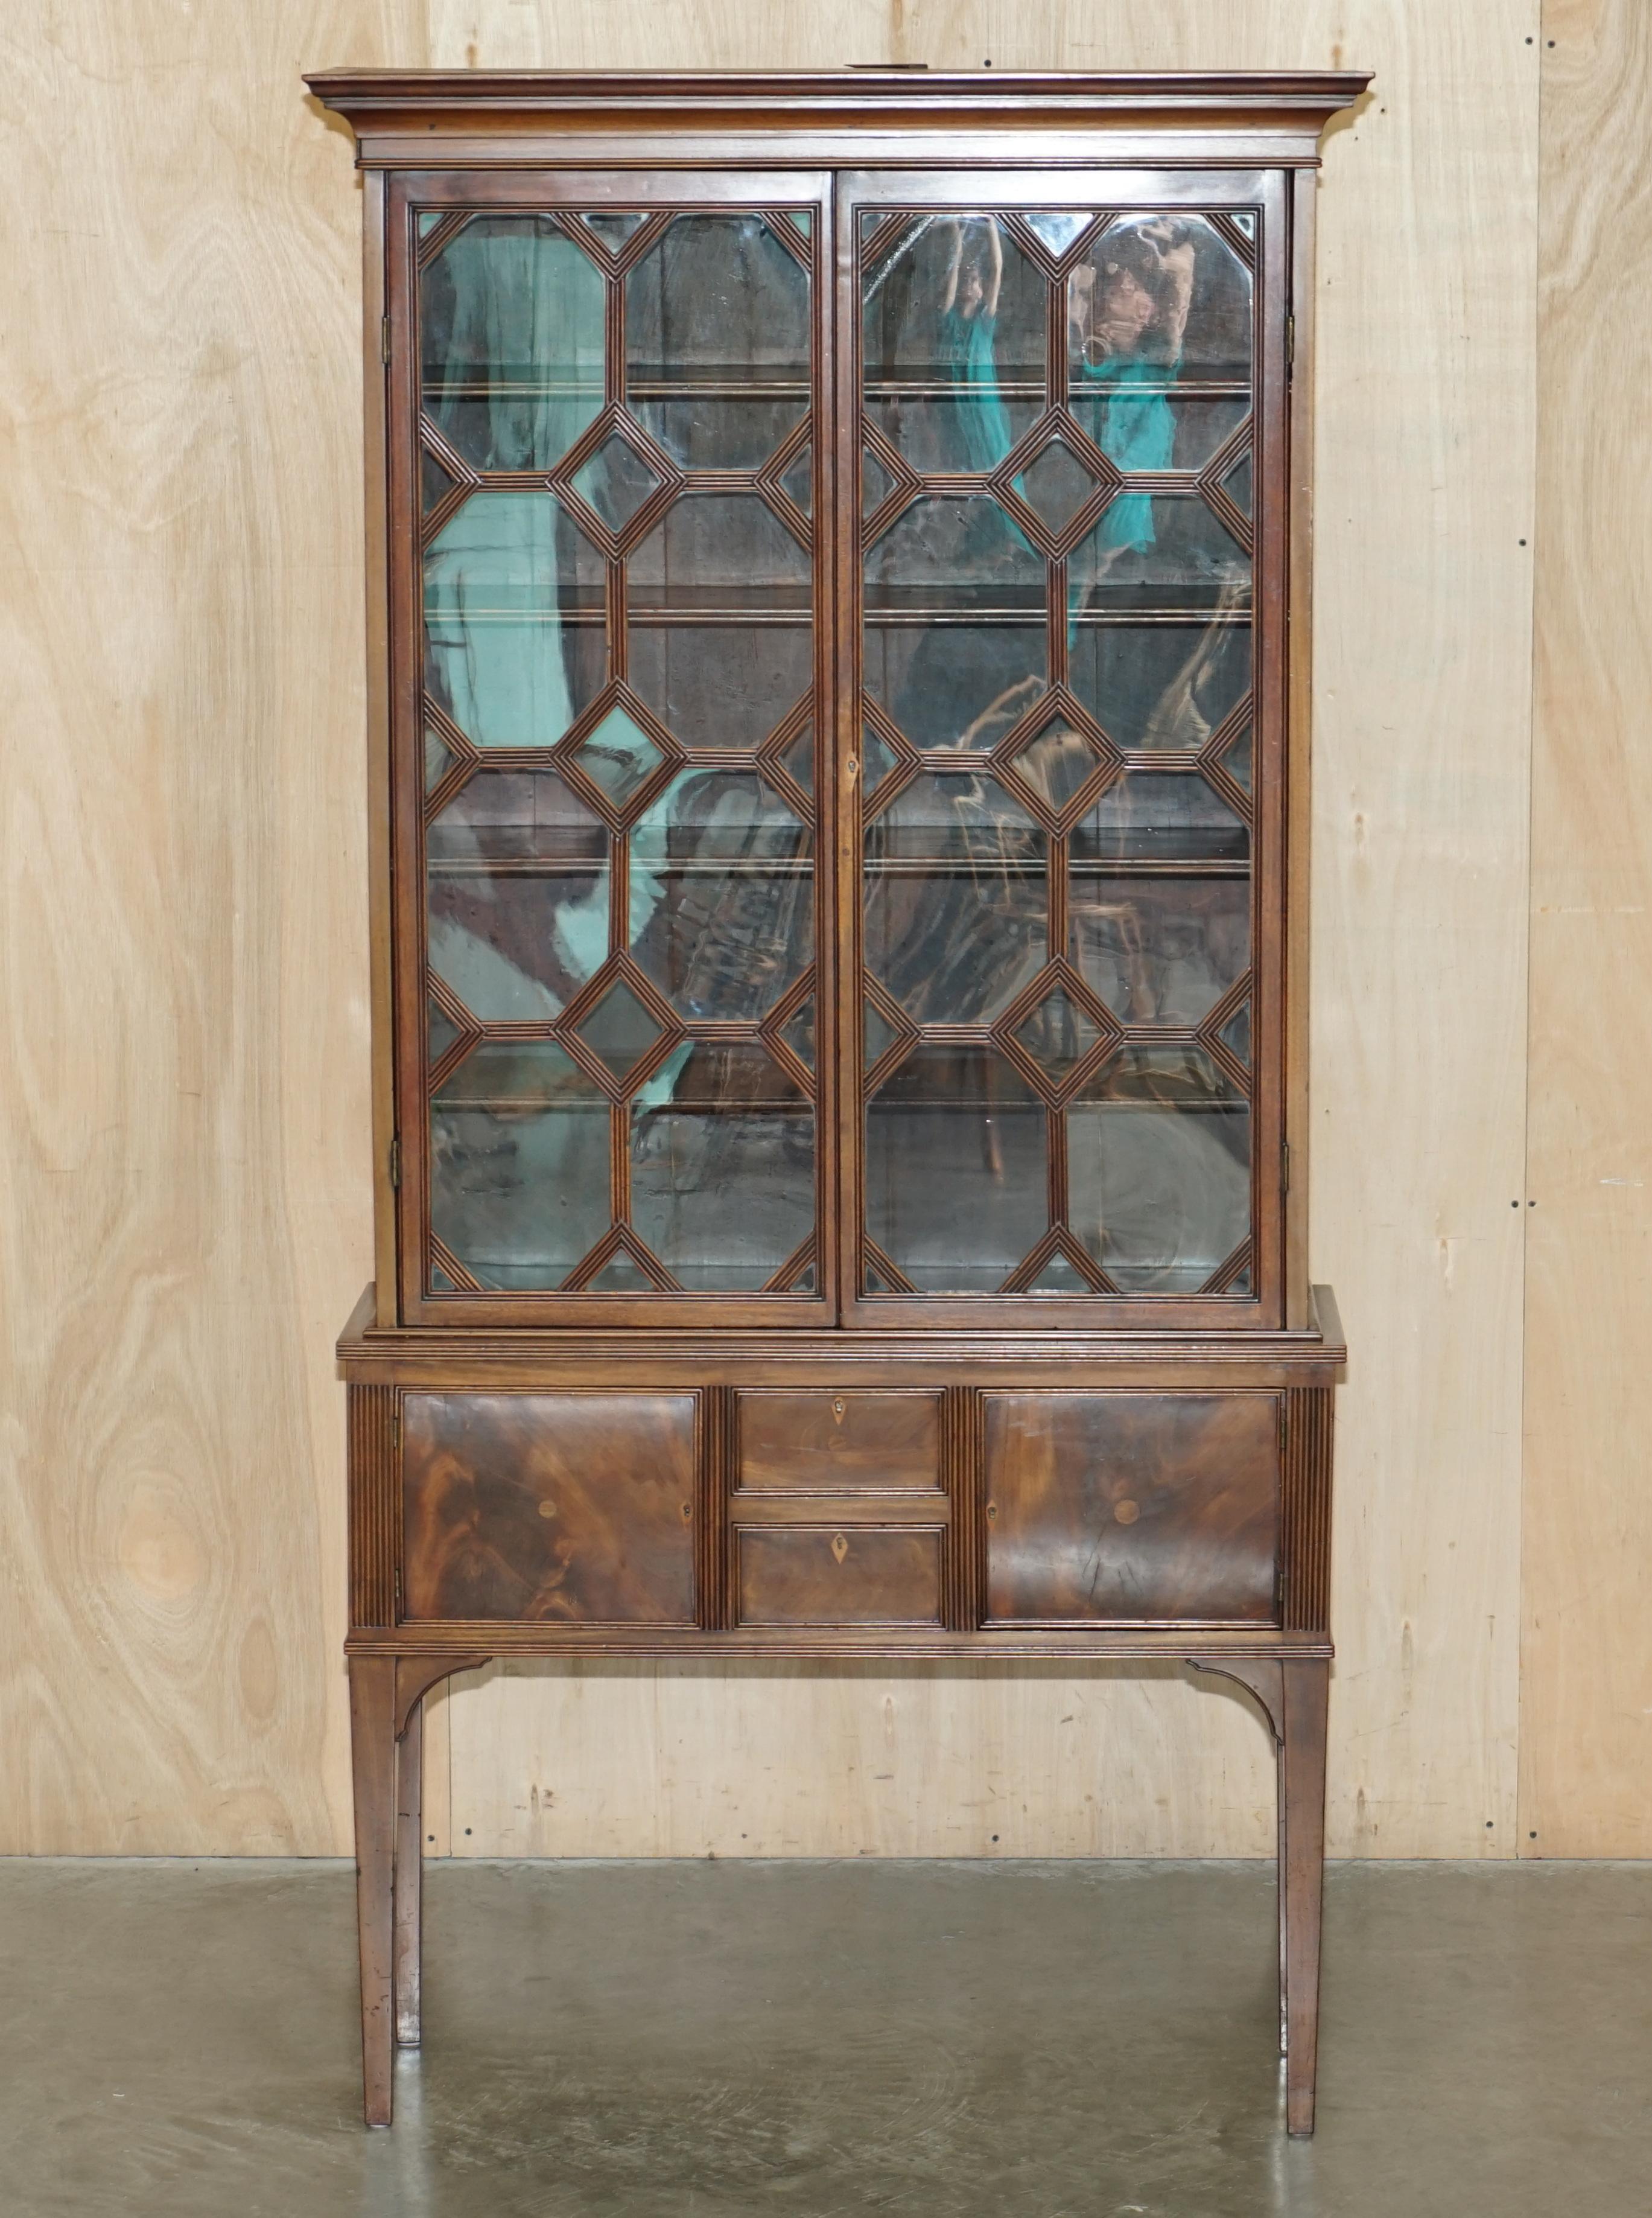 Royal House Antiques

Royal House Antiques is delighted to offer for sale this very Elegant, hand made in England Astral glazed Library bookcase with long legs and a flamed mahogany cupboard base

Please note the delivery fee listed is just a guide,